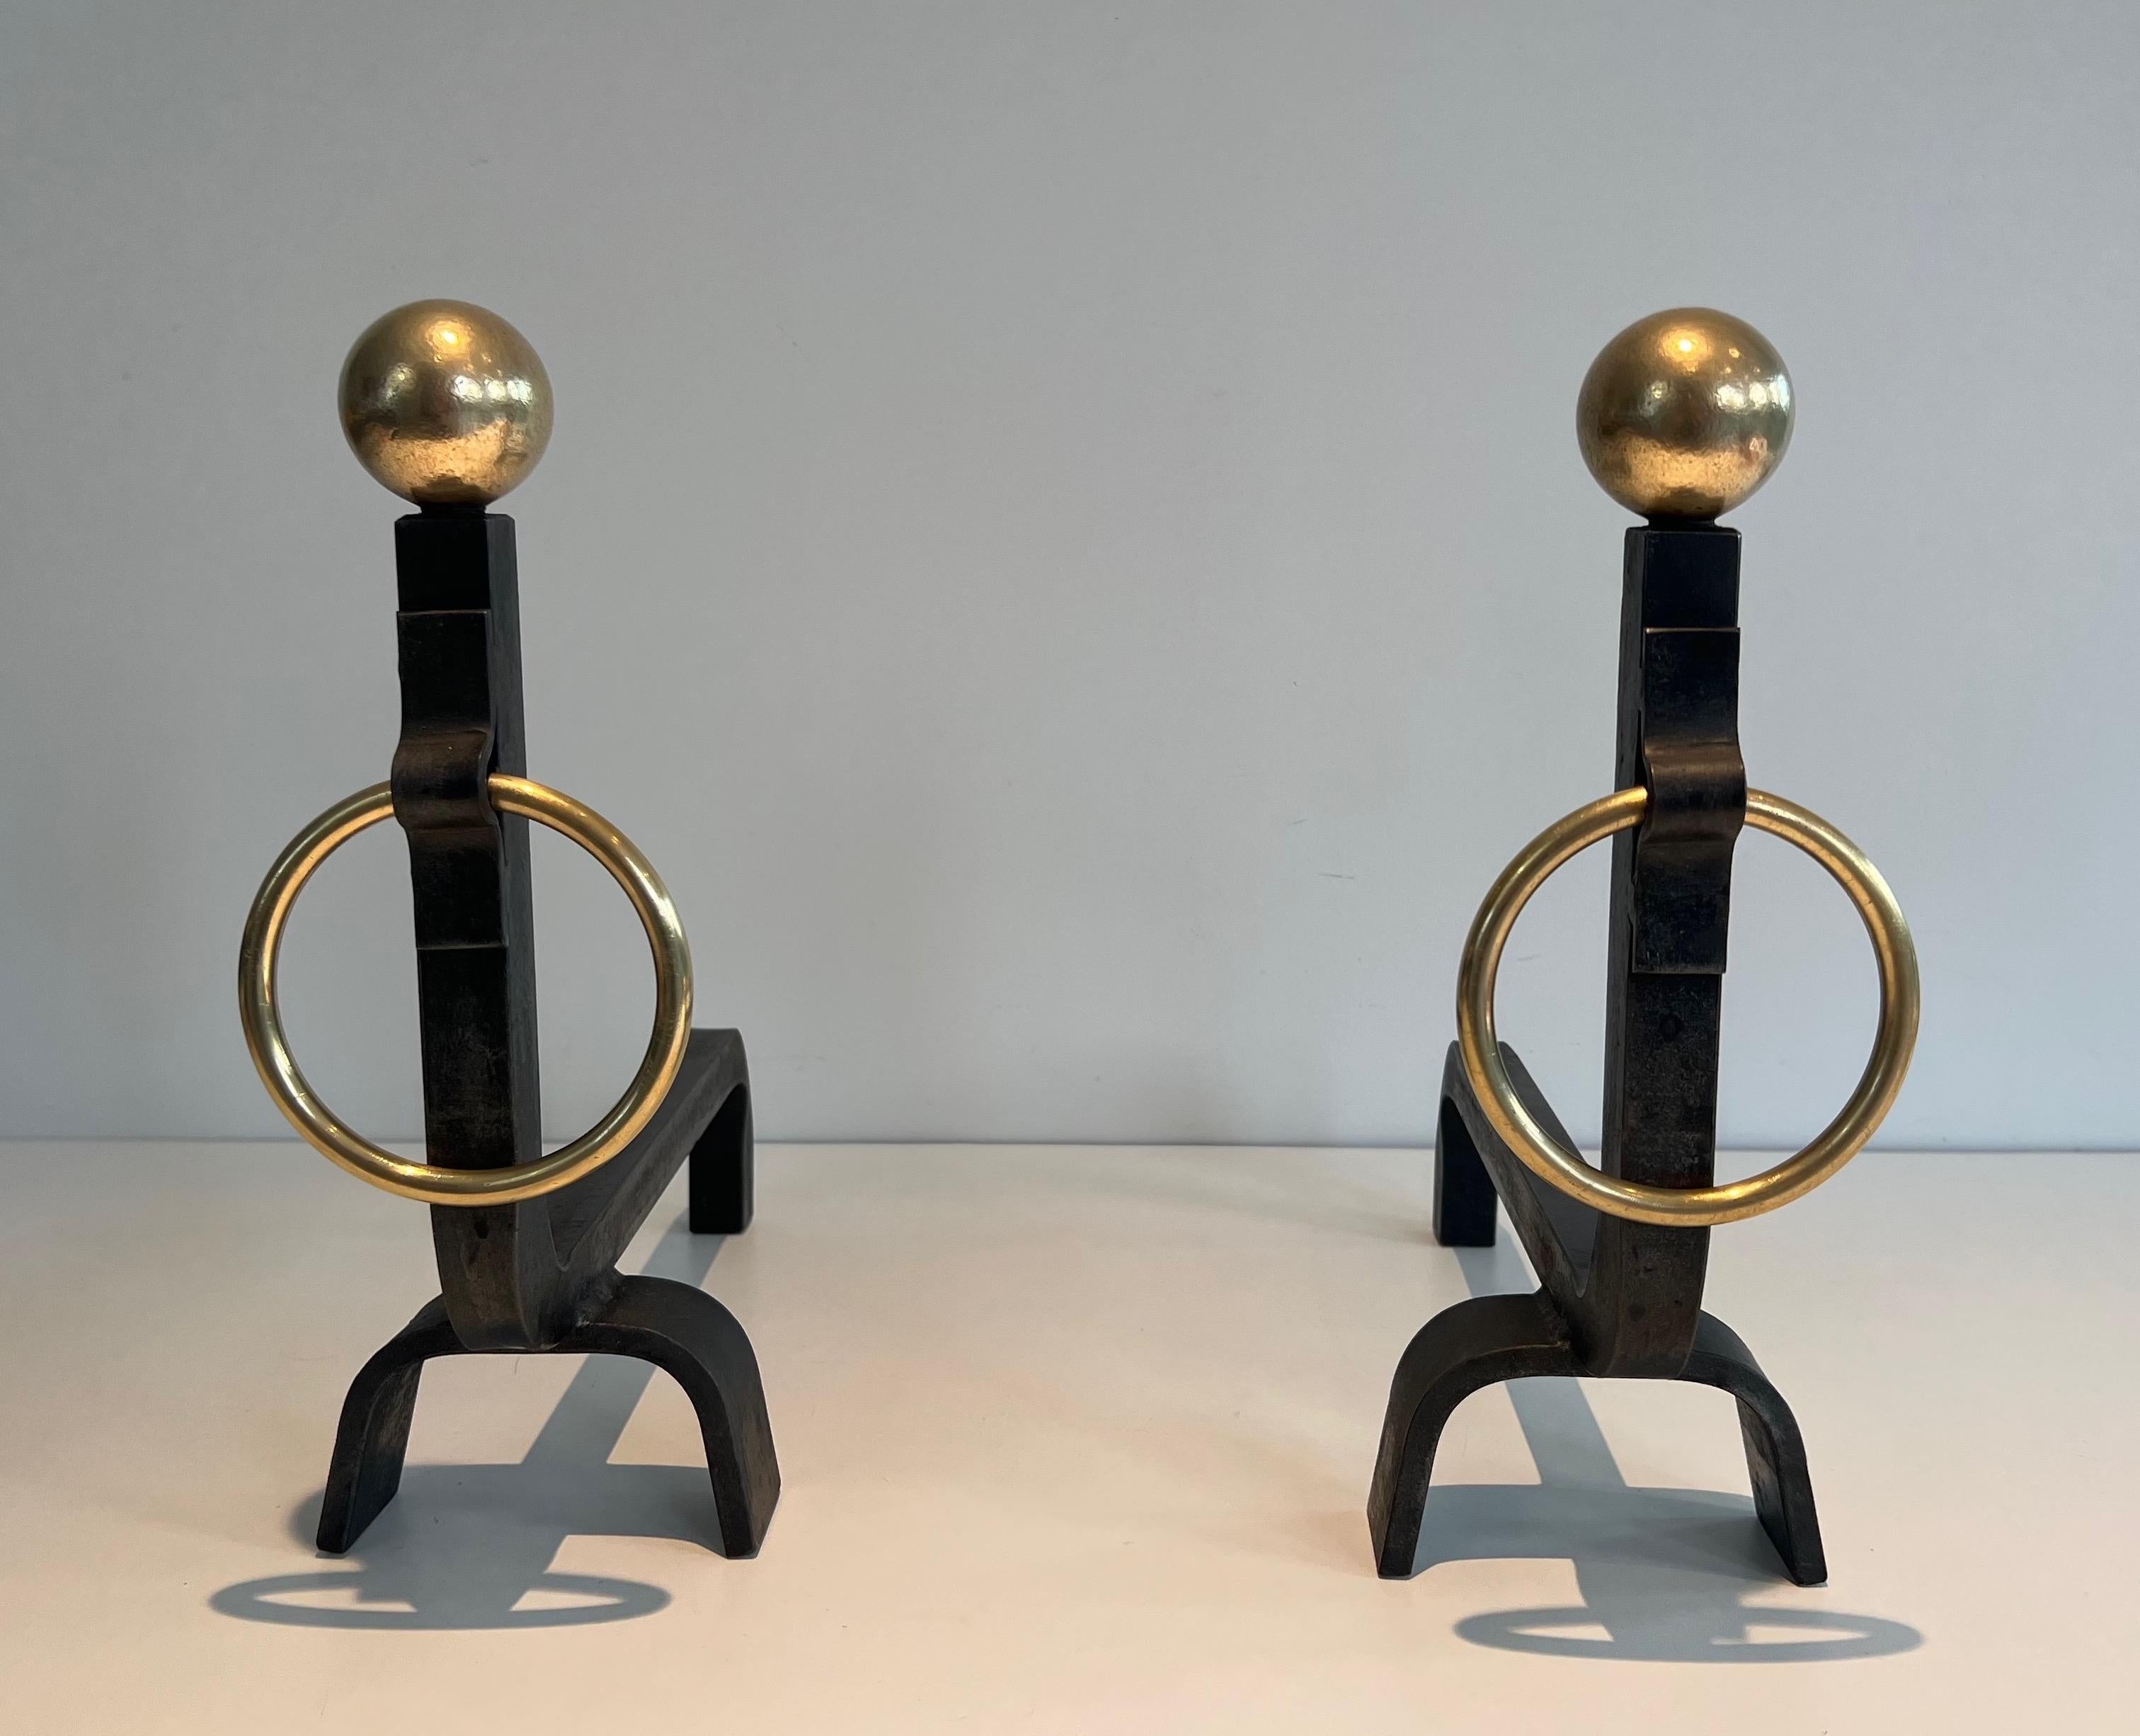 This very nice pair of andirons is made of wrought iron and brass. The quality of these andirons is very good and the design very stylished. This is a  French work in the style of Jacques Adnet. Circa 1950